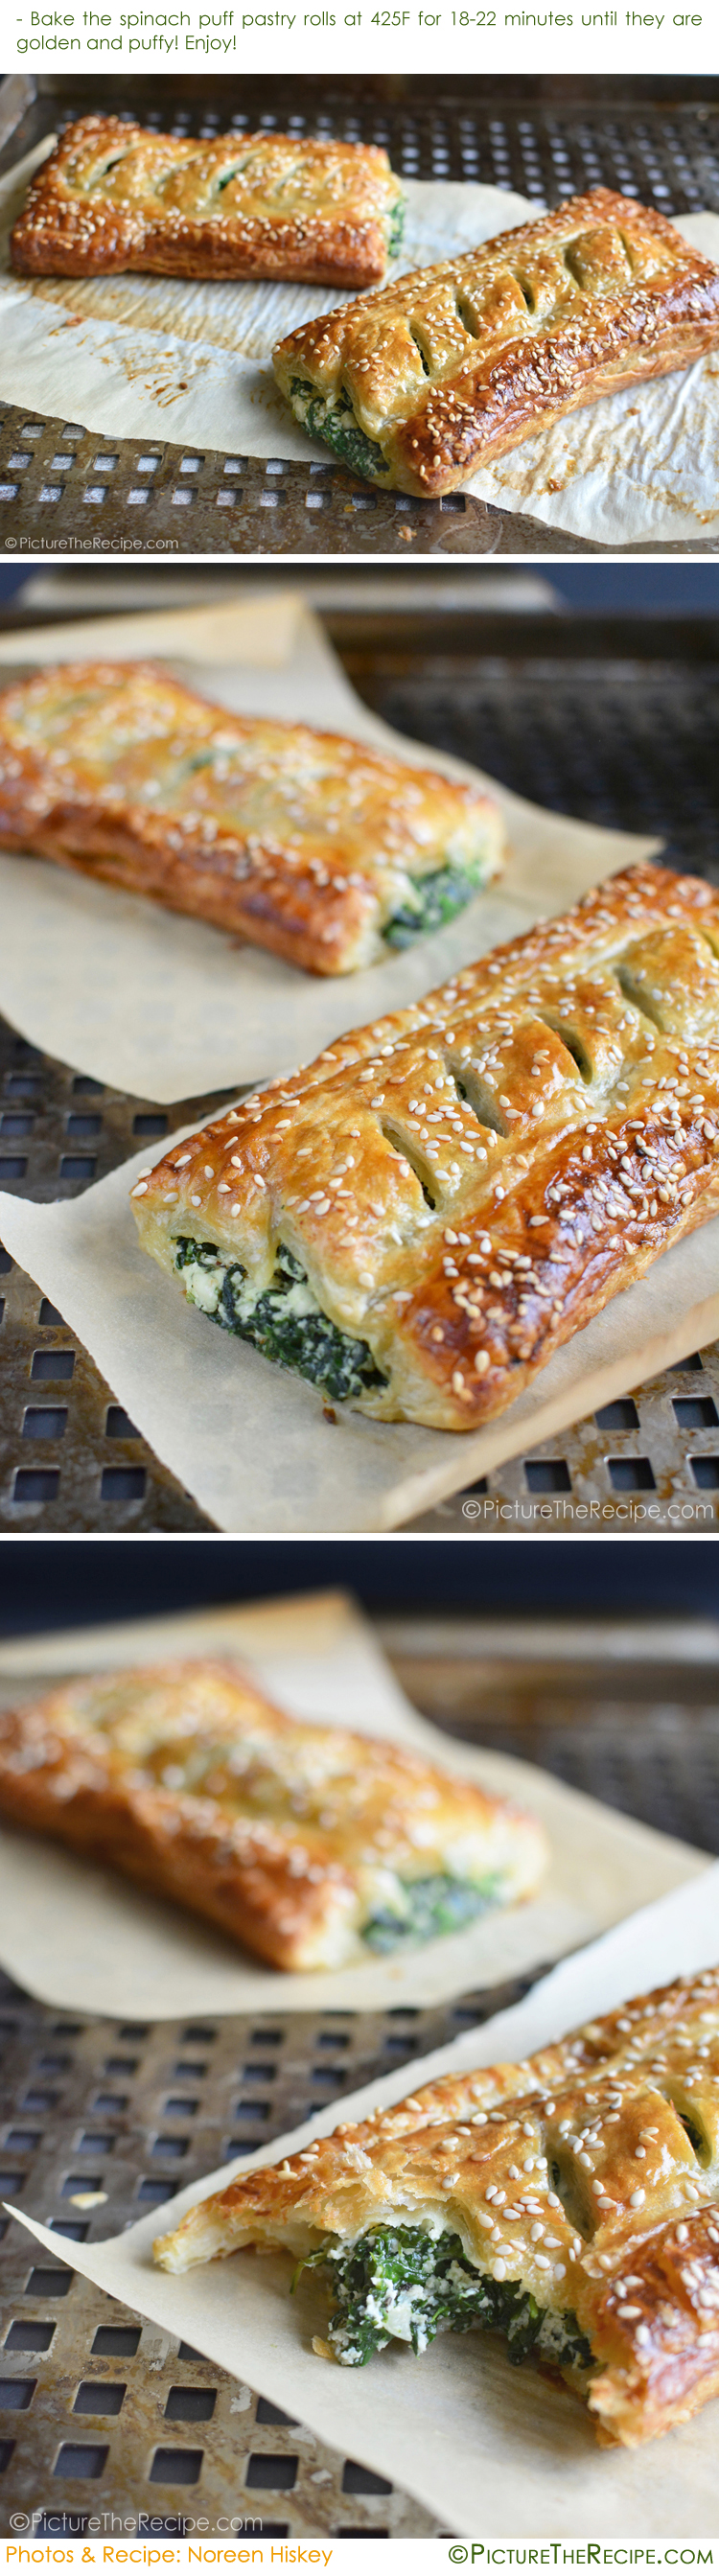 Spinach Puff Pastry Rolls with Feta and Ricotta Recipe- PictureTheRecipe com